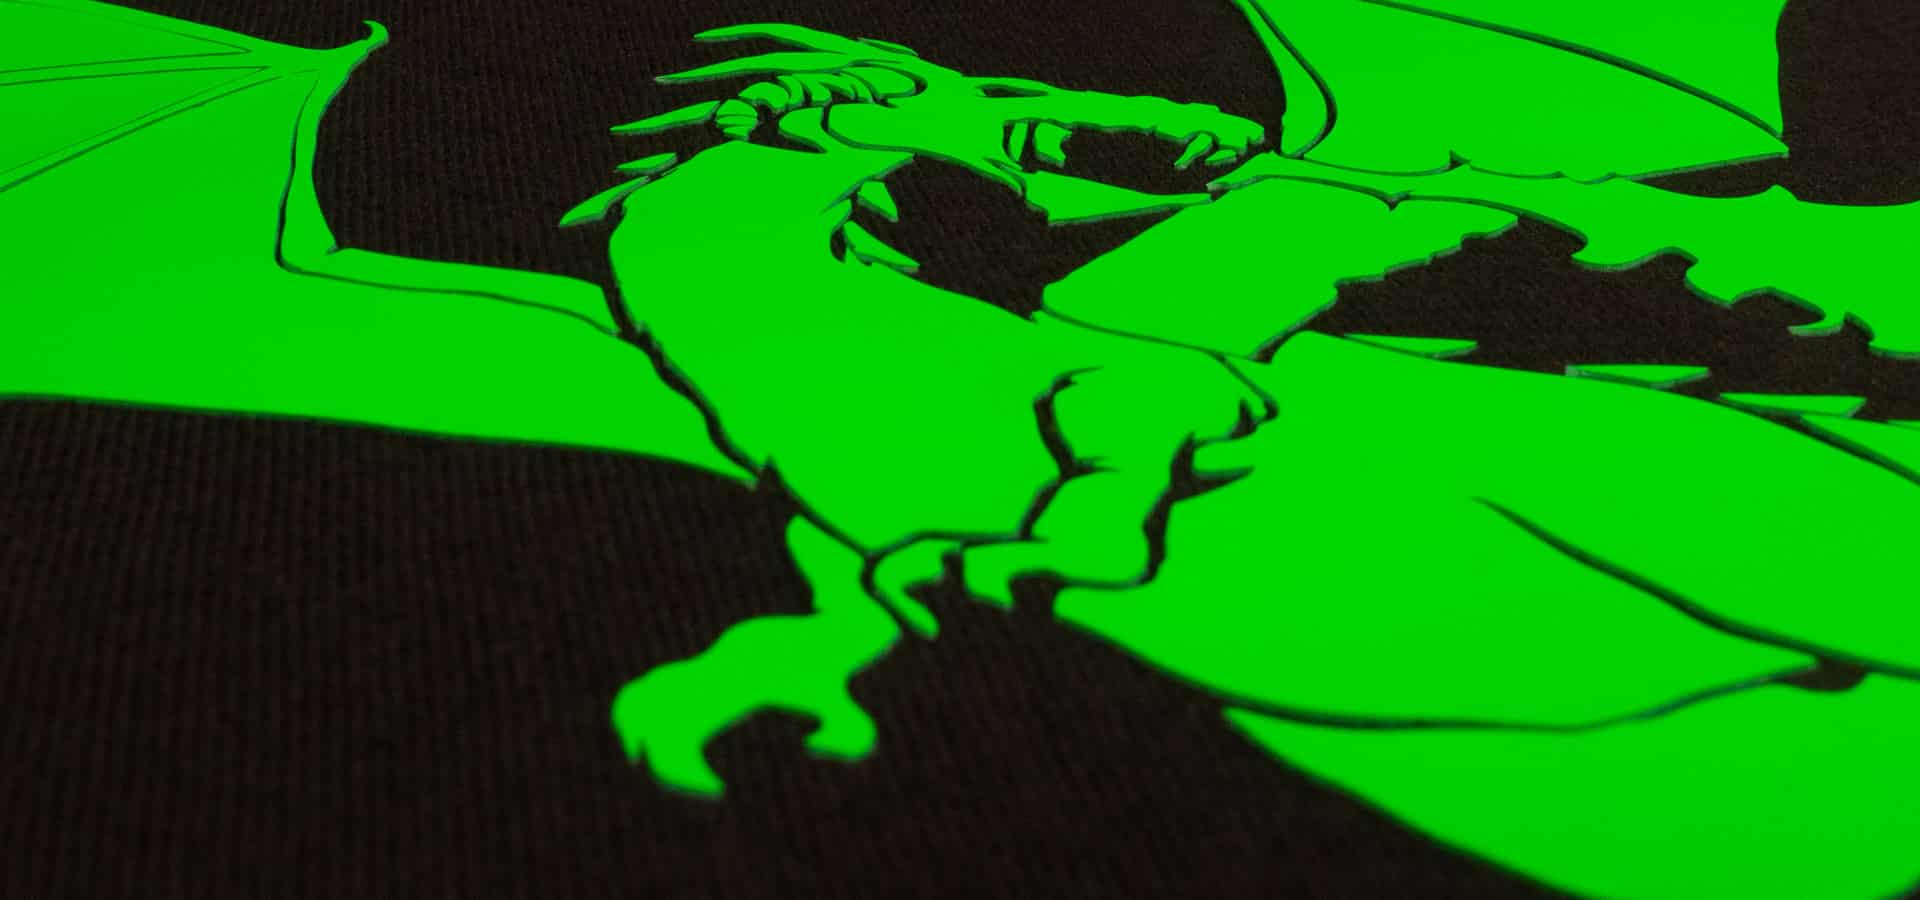 A dragon design made with Neon Green Dimension 2- the image is taken at an angle to show the thickness of the material.